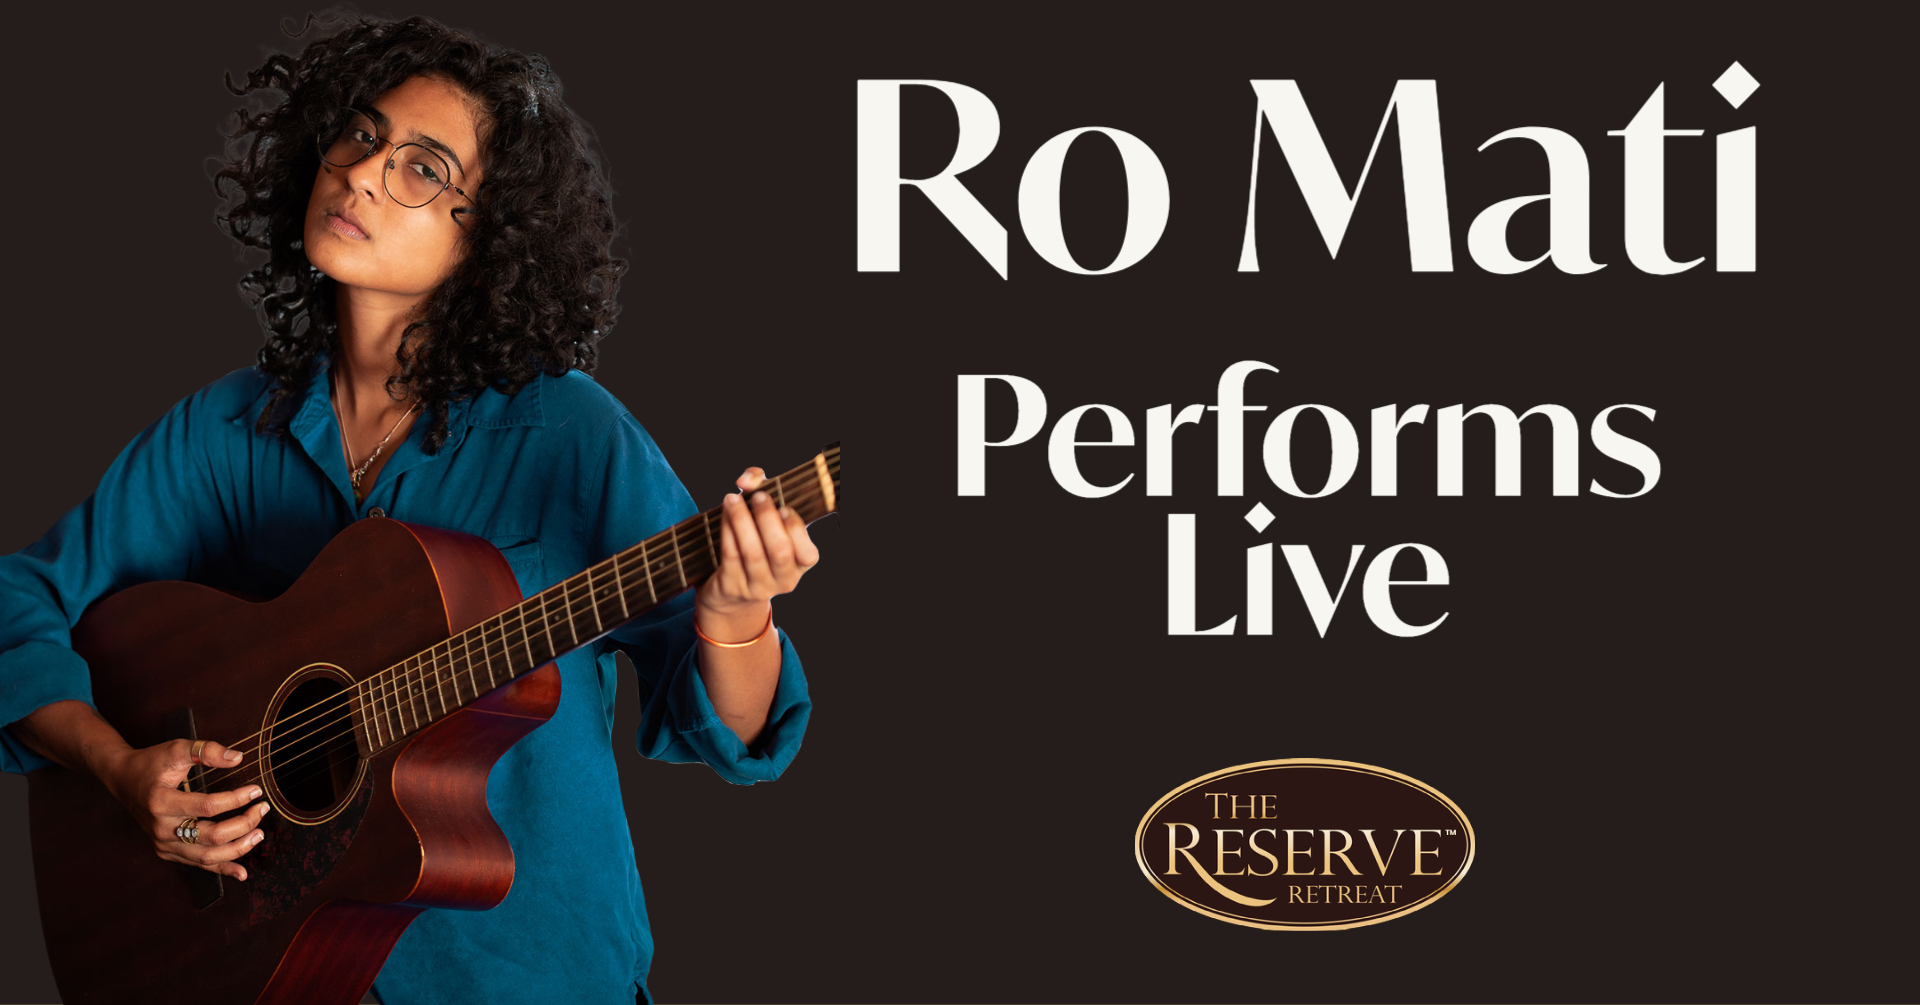 Ro Mati performs live on Feb 18 at The Reserve Retreat